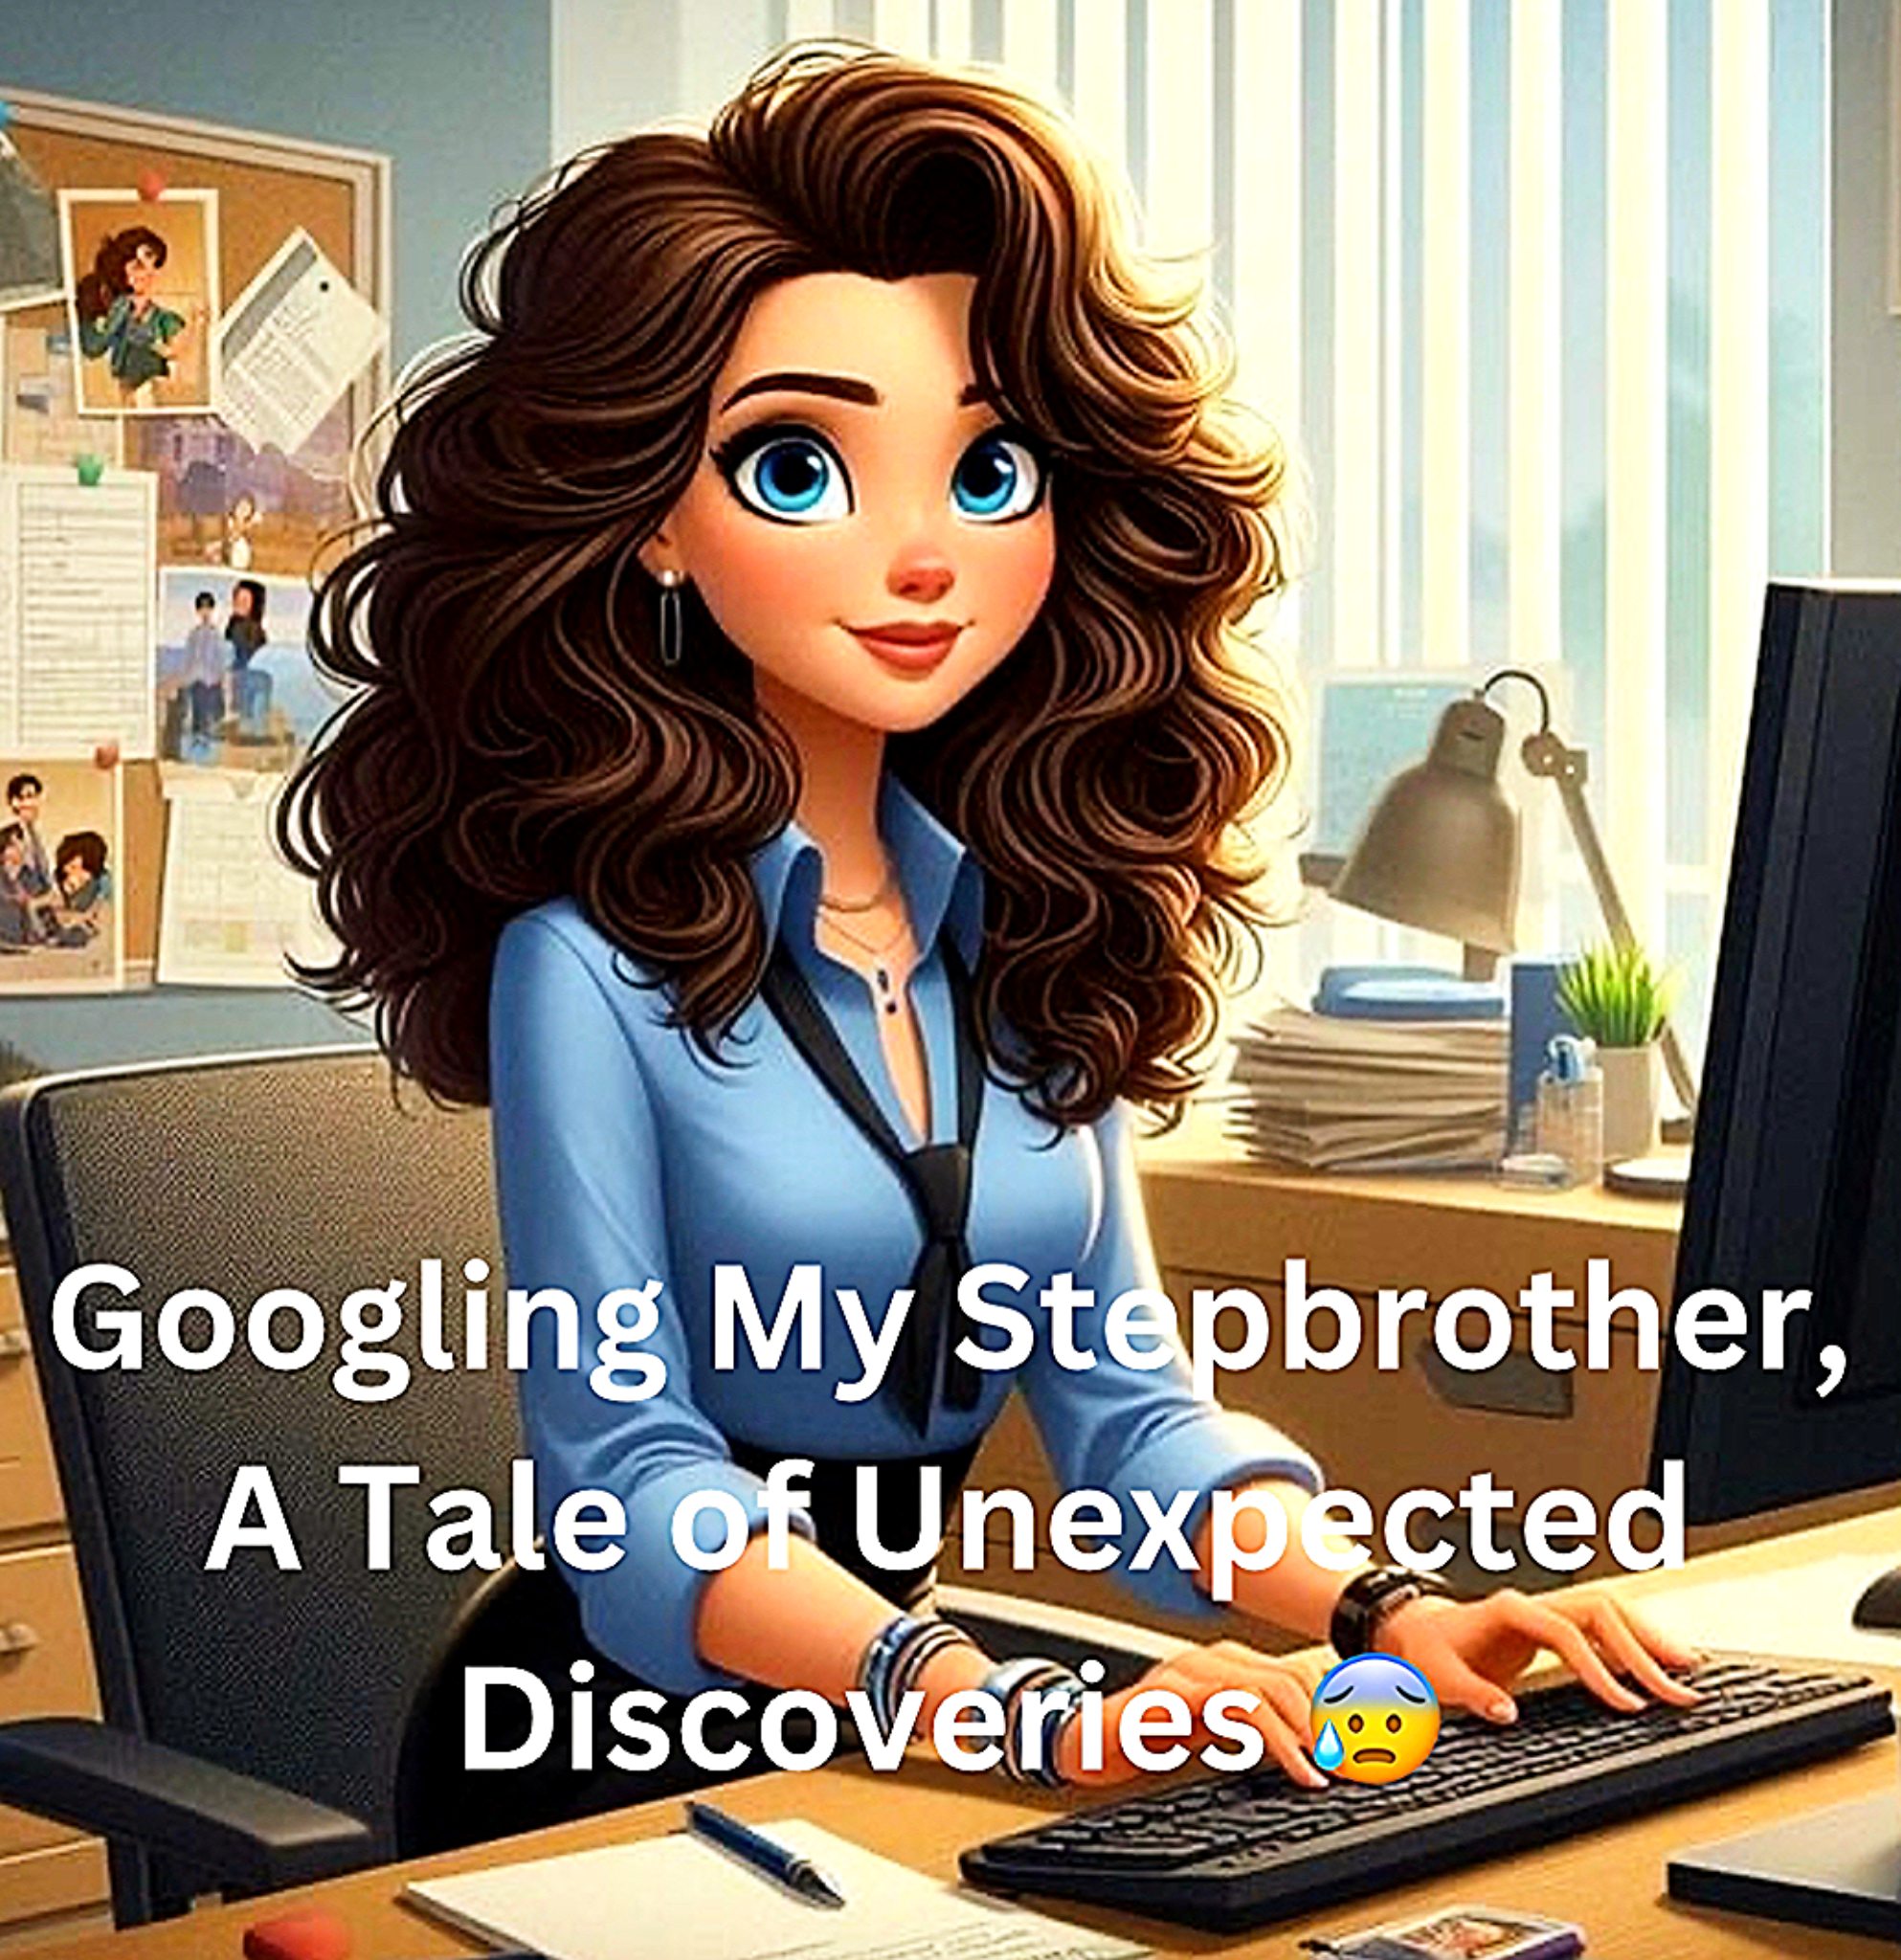 S19 Ep17: Googling My Stepbrother, A Tale of Unexpected Discoveries 😰